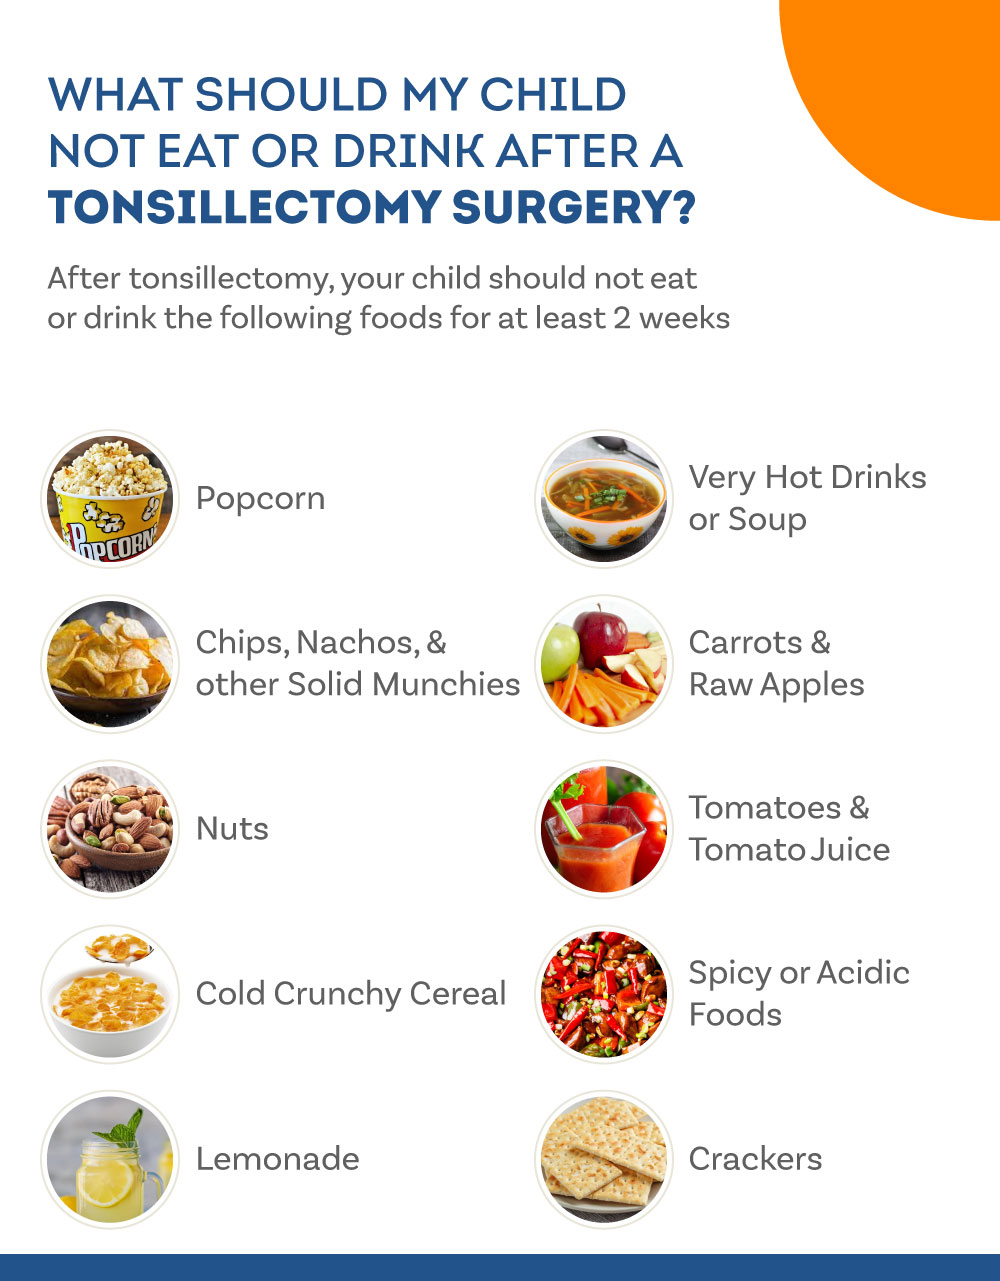 foods and drinks you should not give to your child after tonsillectomy 